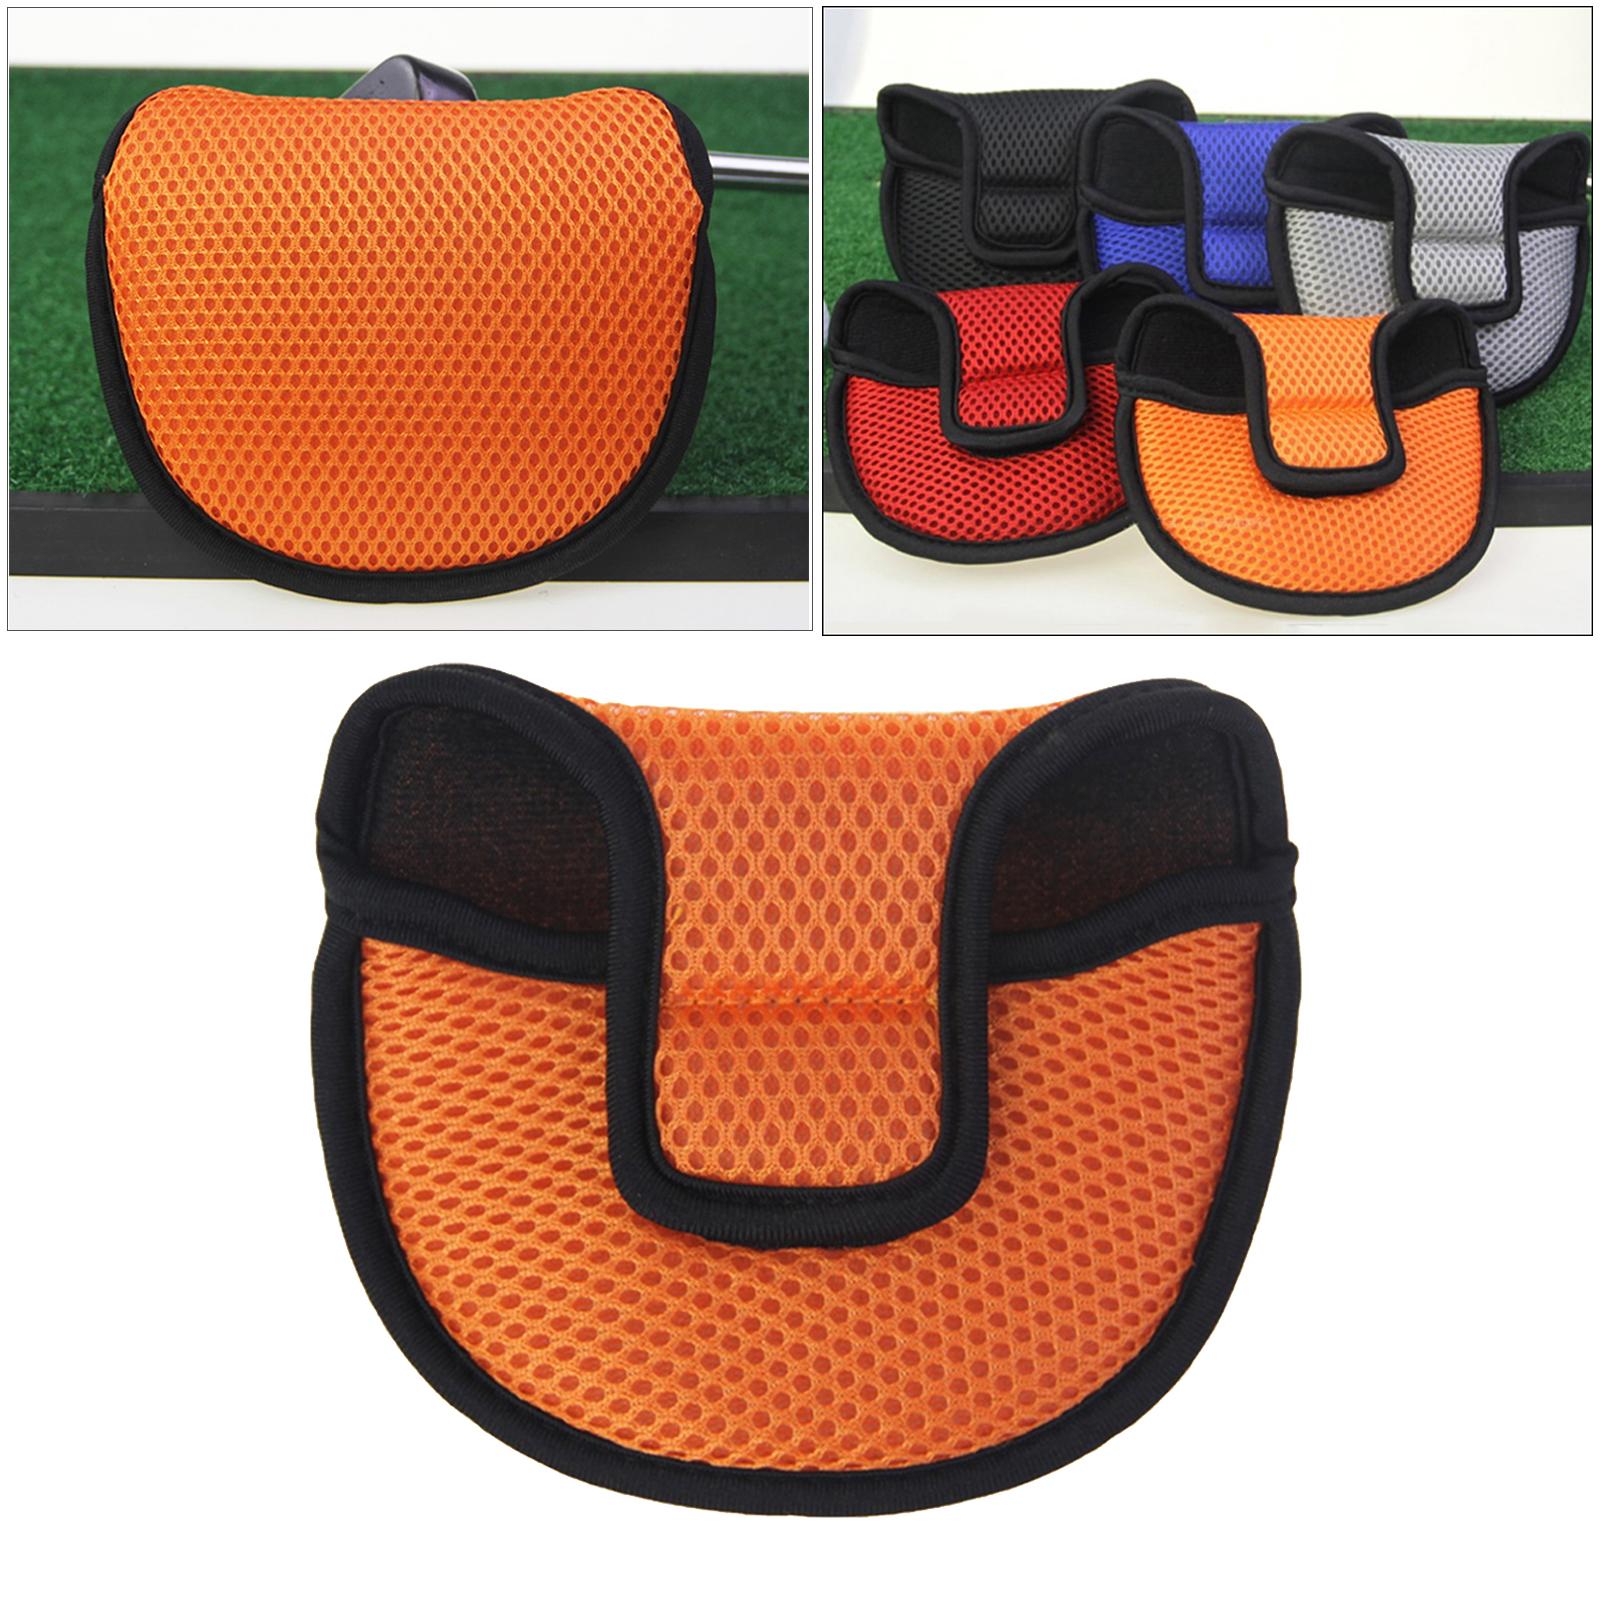 Golf Mallet Putter Head Cover Protect Clubs Headcover Fits All Brands Orange